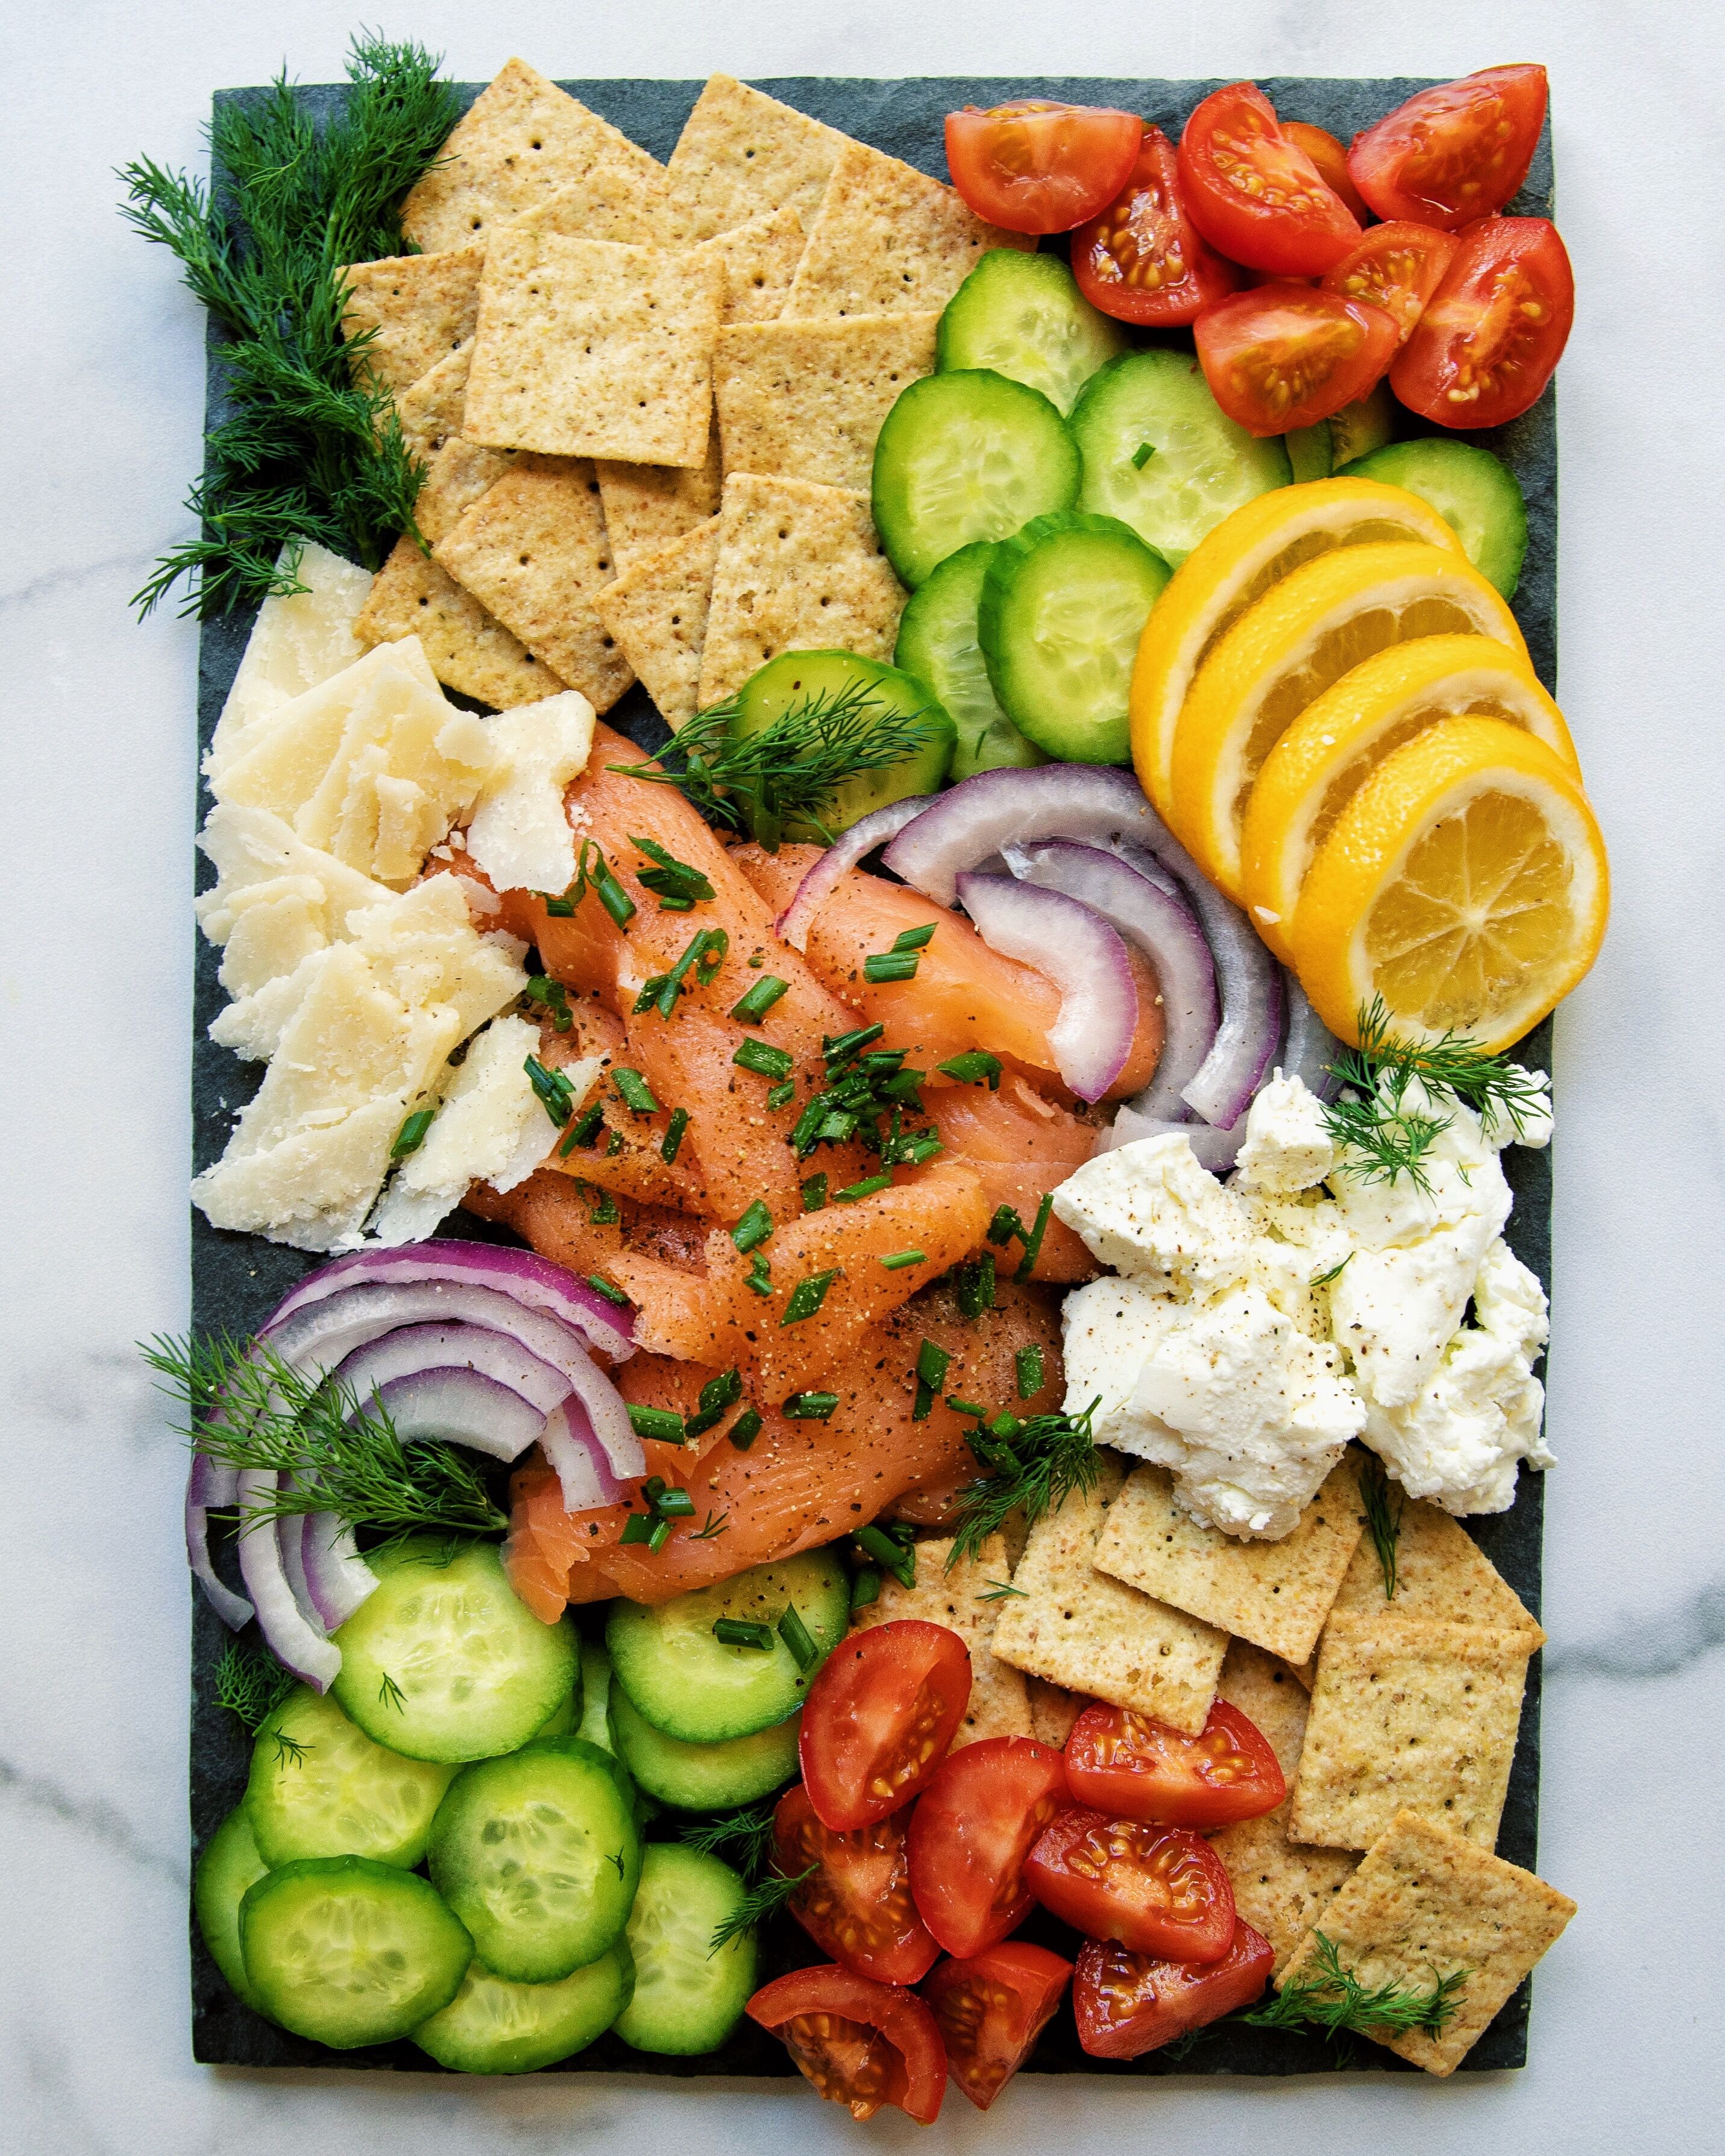 Smoked Salmon Brunch Charcuterie Board by kalememaybe | Quick & Easy Recipe | The Feedfeed